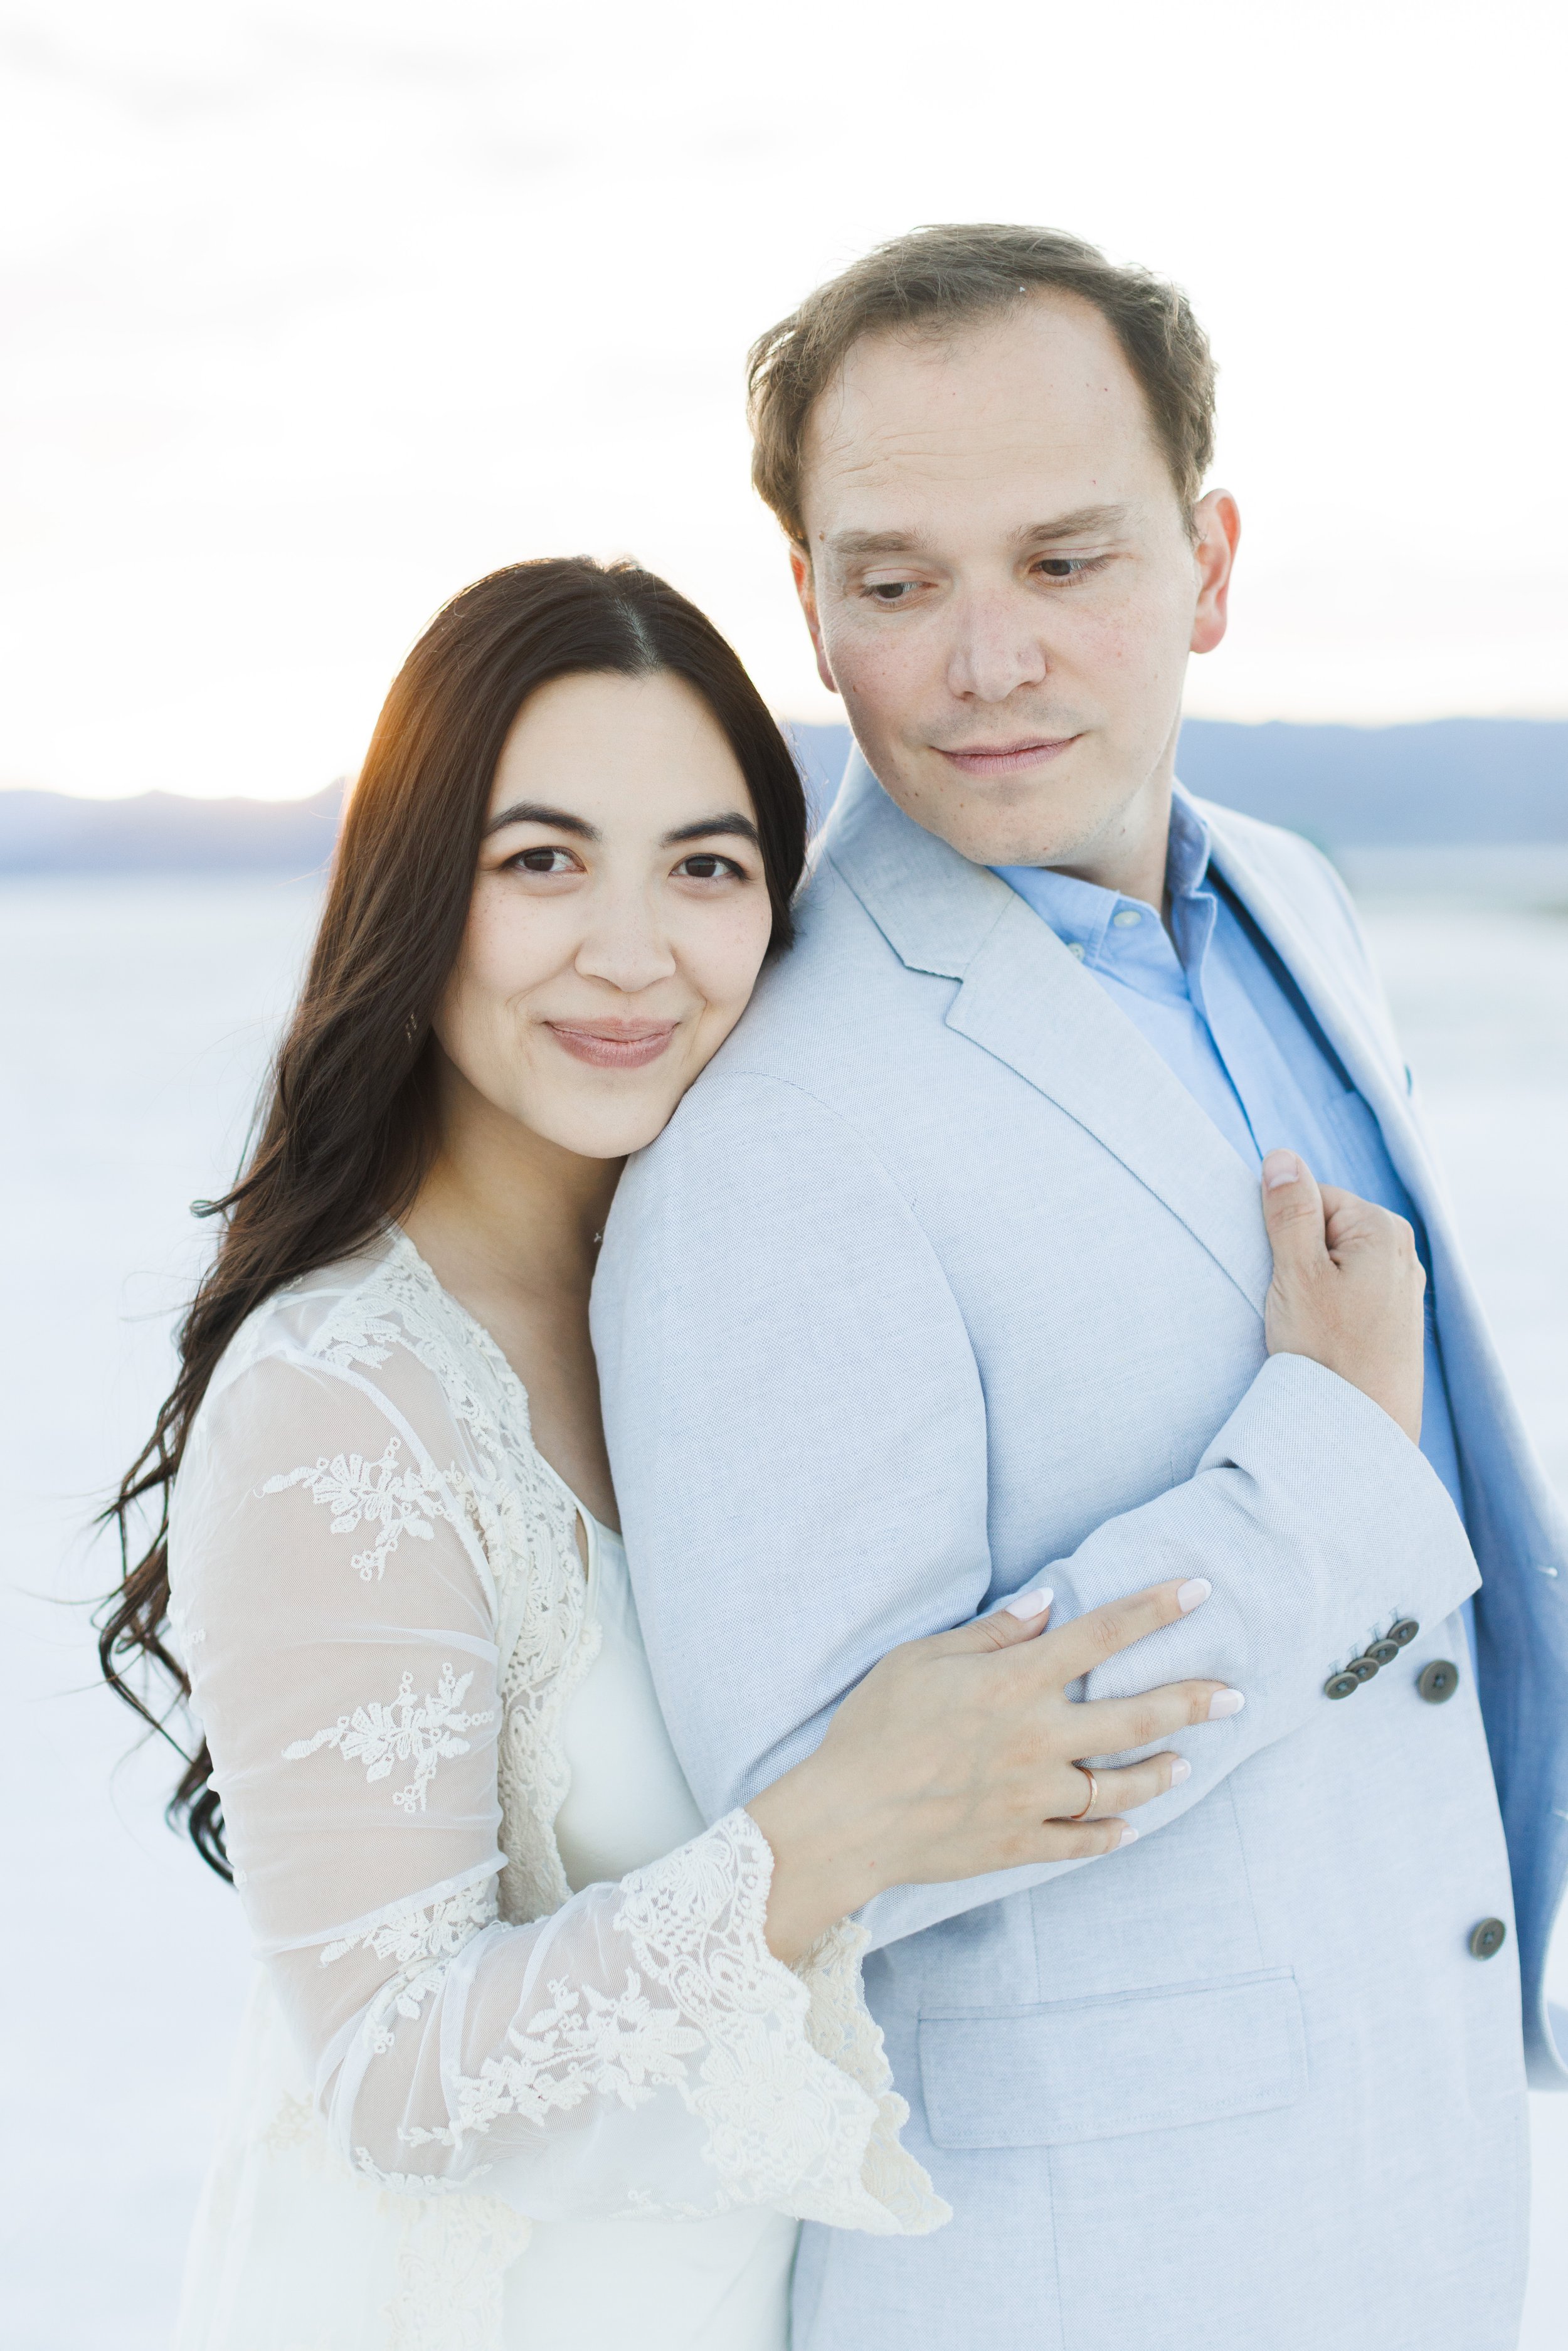  Clean timeless engagement portrait of a couple at the Salt Flats in Utah by Savanna Richardson Photography. salt flat engagements #SavannaRichardsonPhotography #SavannaRichardsonWeddings #bridals #formals #bouquets #Utahweddingphotographers #Wedding